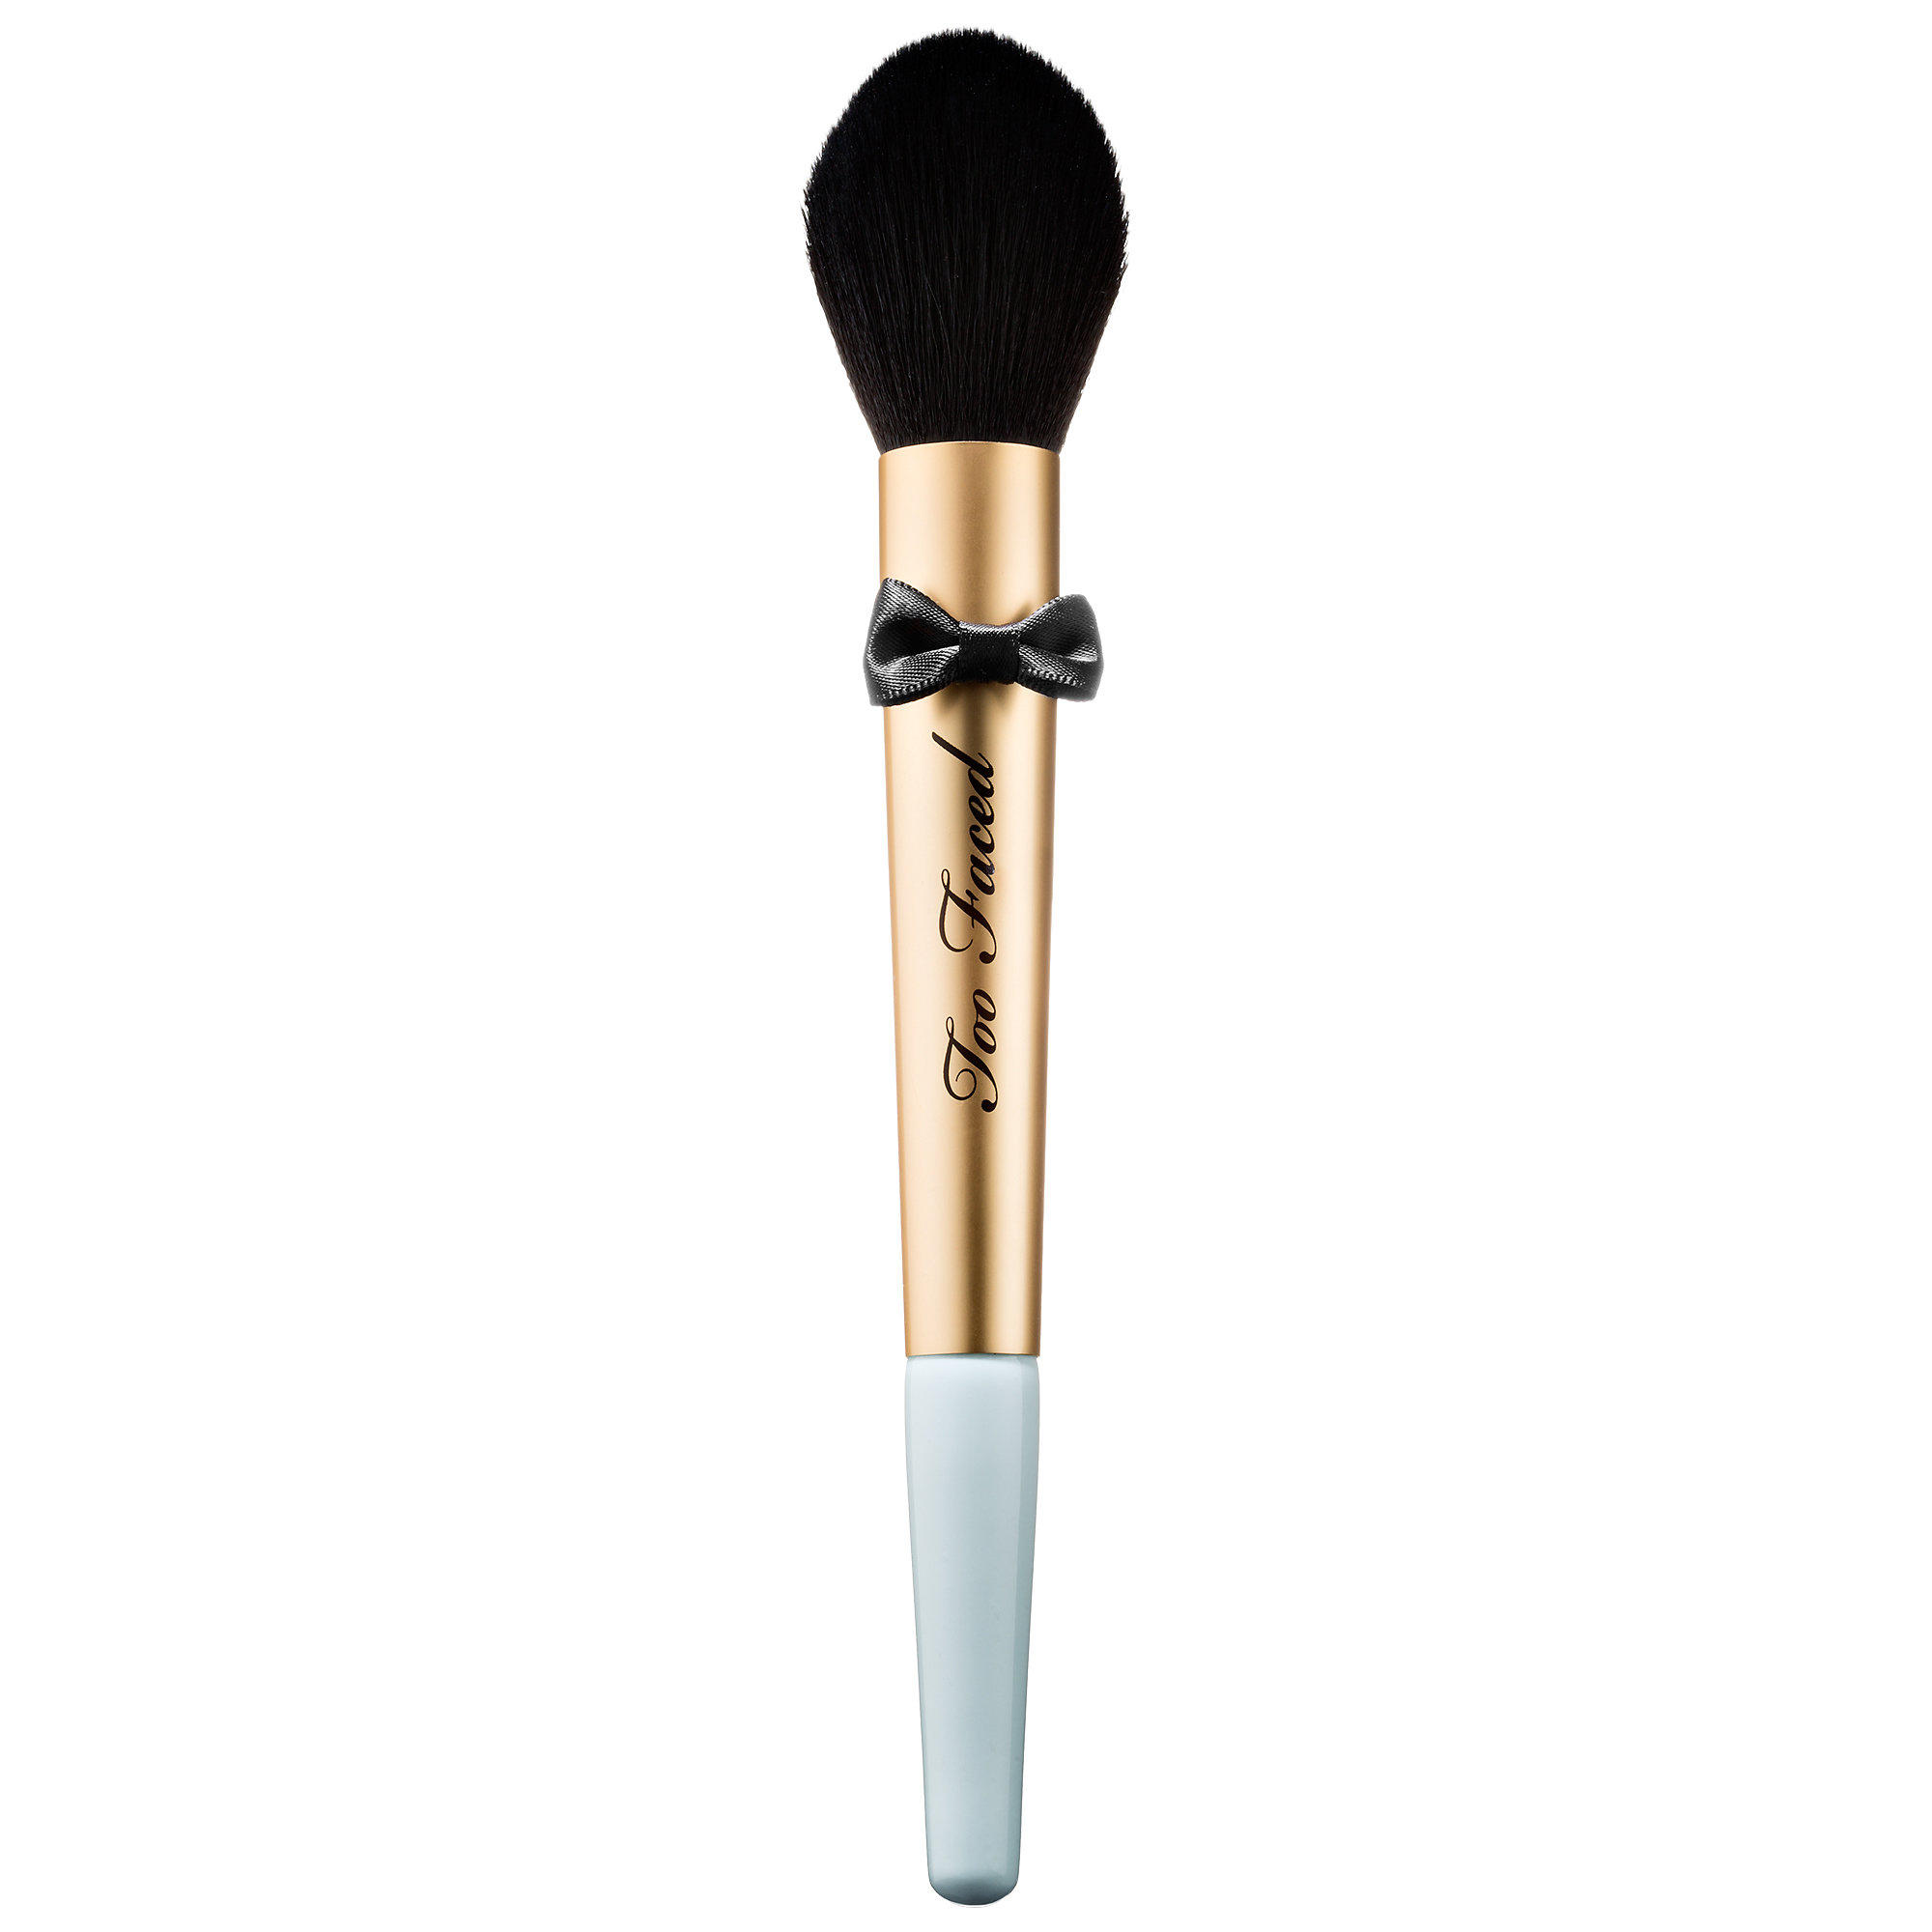 Too Faced The Perfect Powder Brush Mr. Right